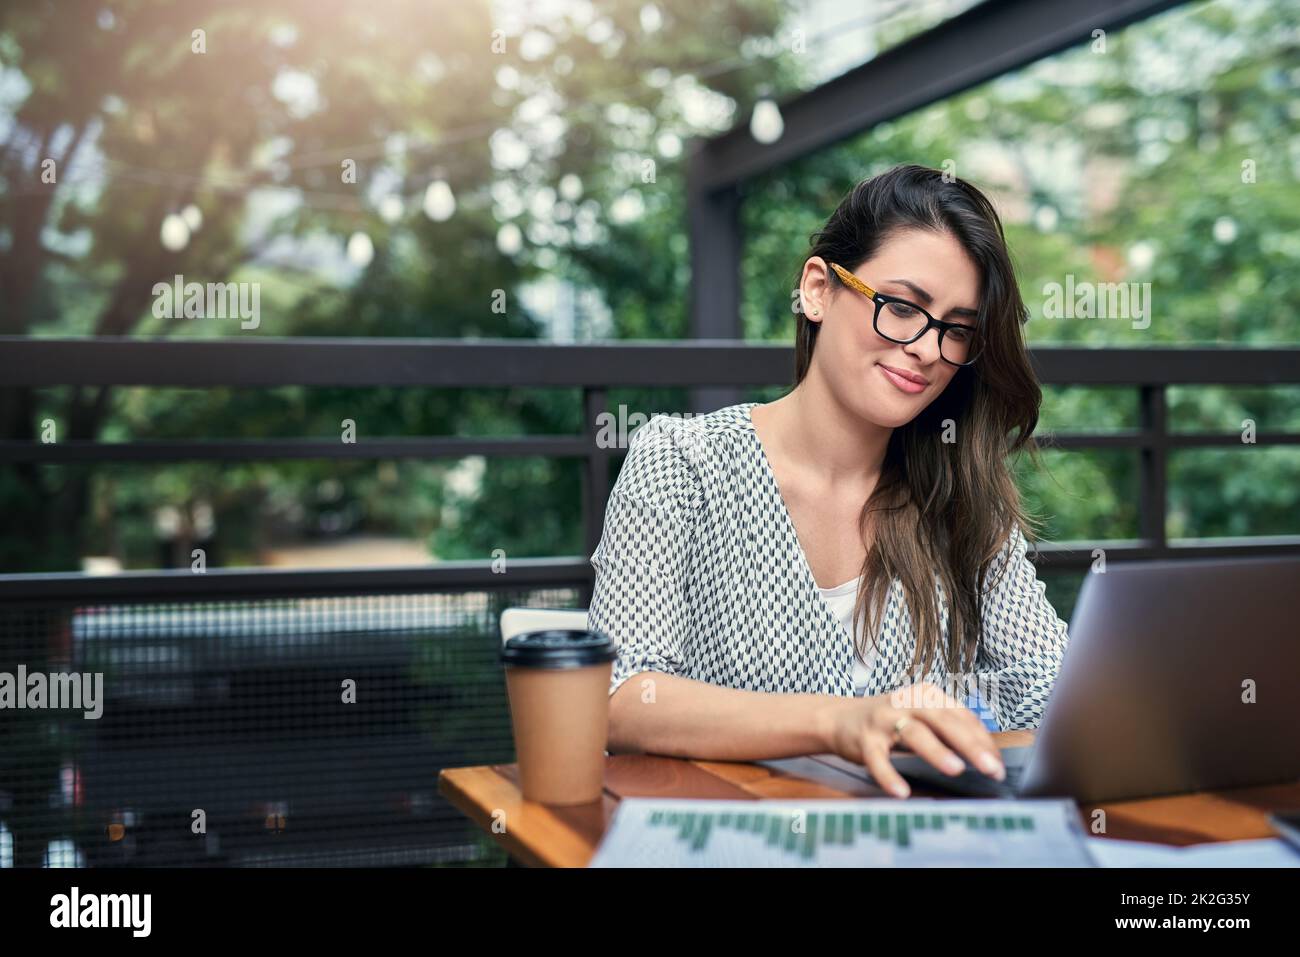 Being productive outside of the office. Cropped shot of an attractive young businesswoman working on her laptop while sitting outdoors at a cafe. Stock Photo